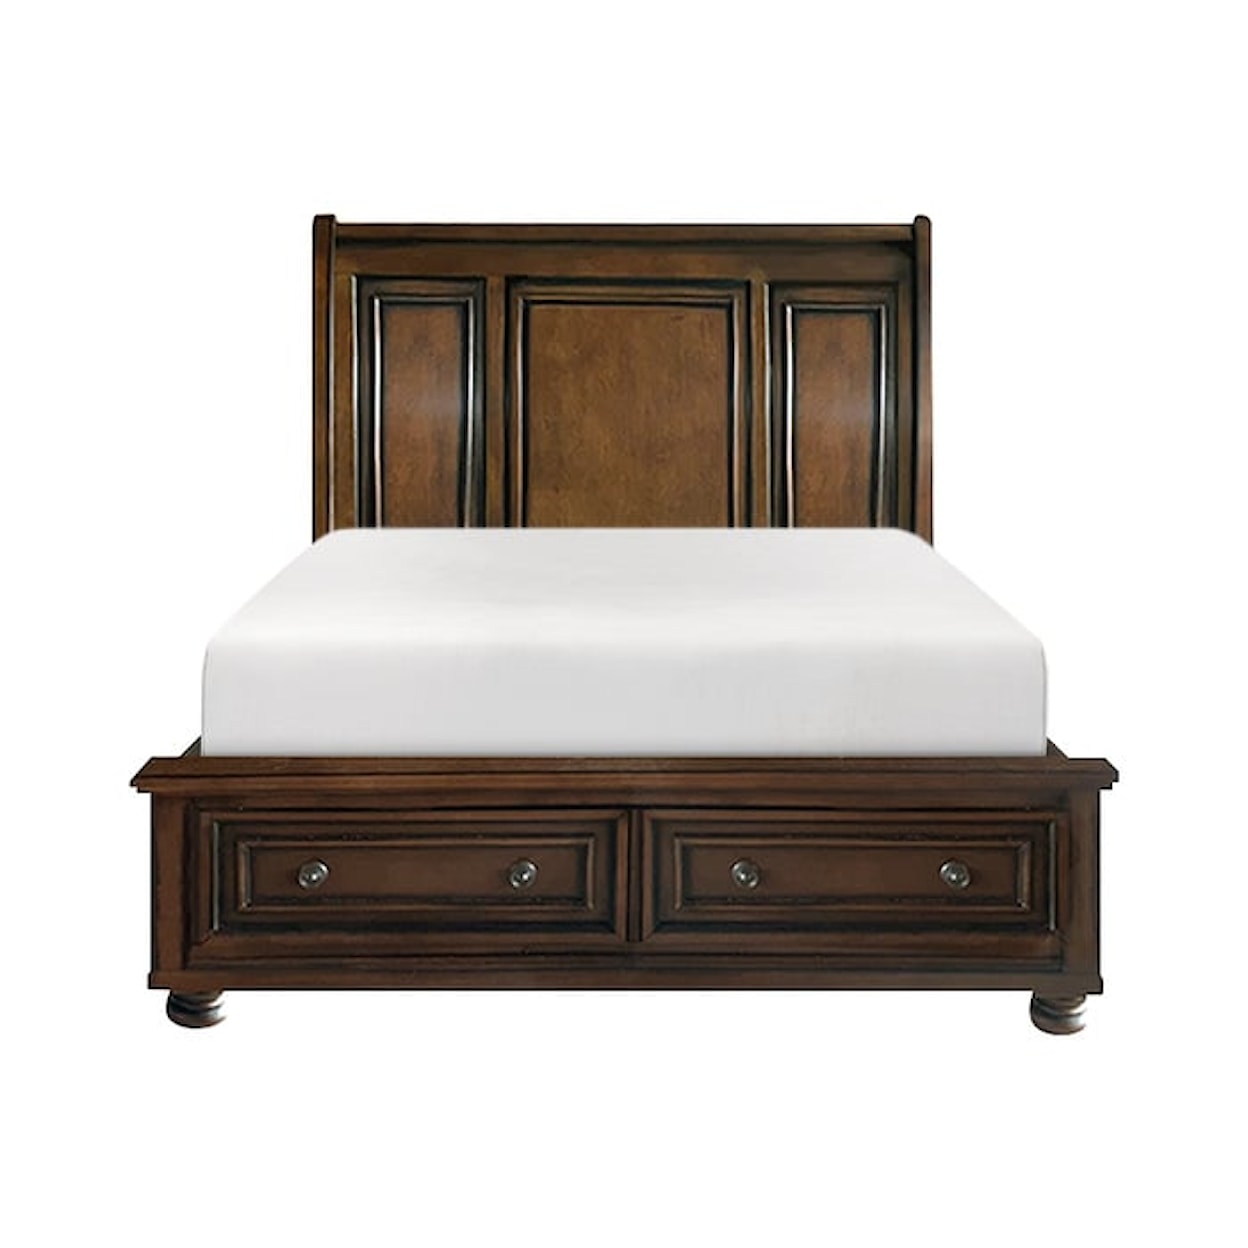 Homelegance Cumberland Full Sleigh Bed with Footboard Storage